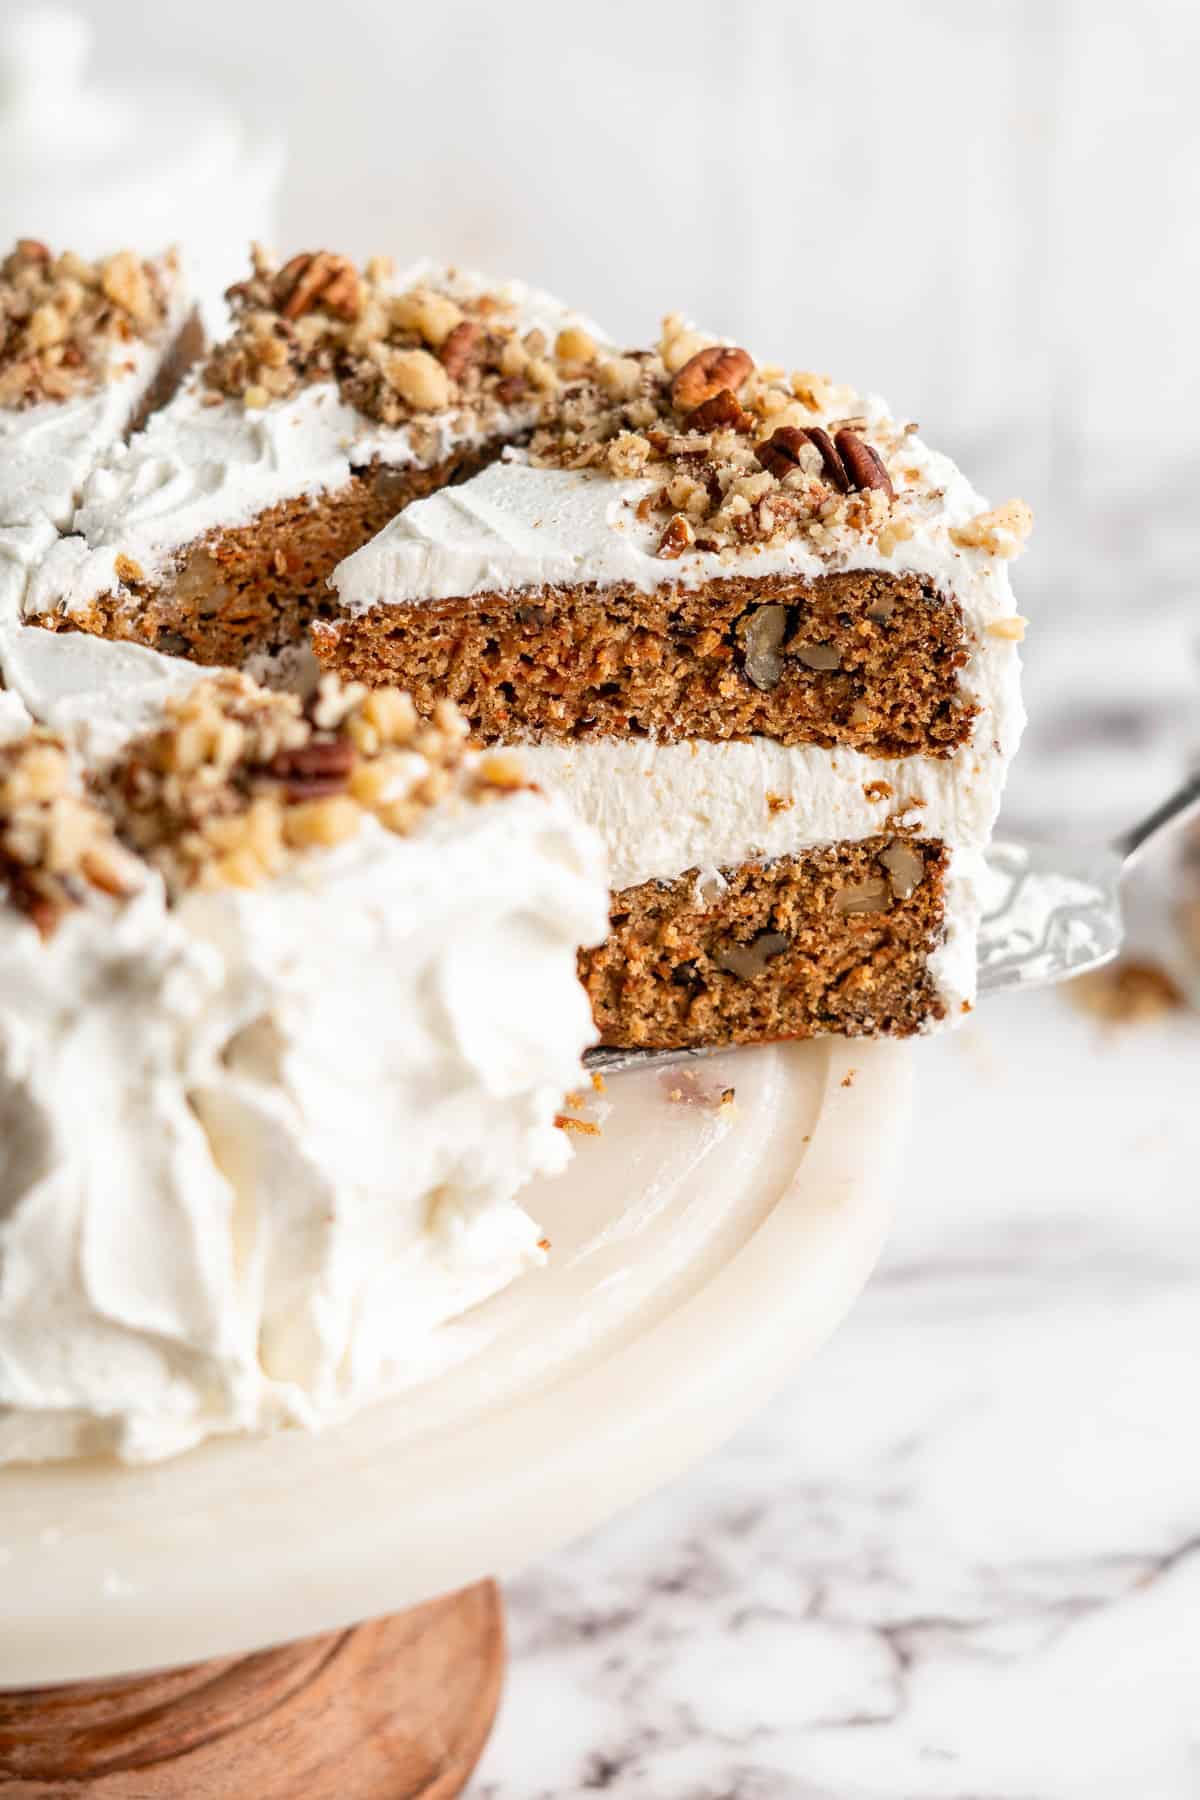 Slice of vegan carrot cake being removed from cake